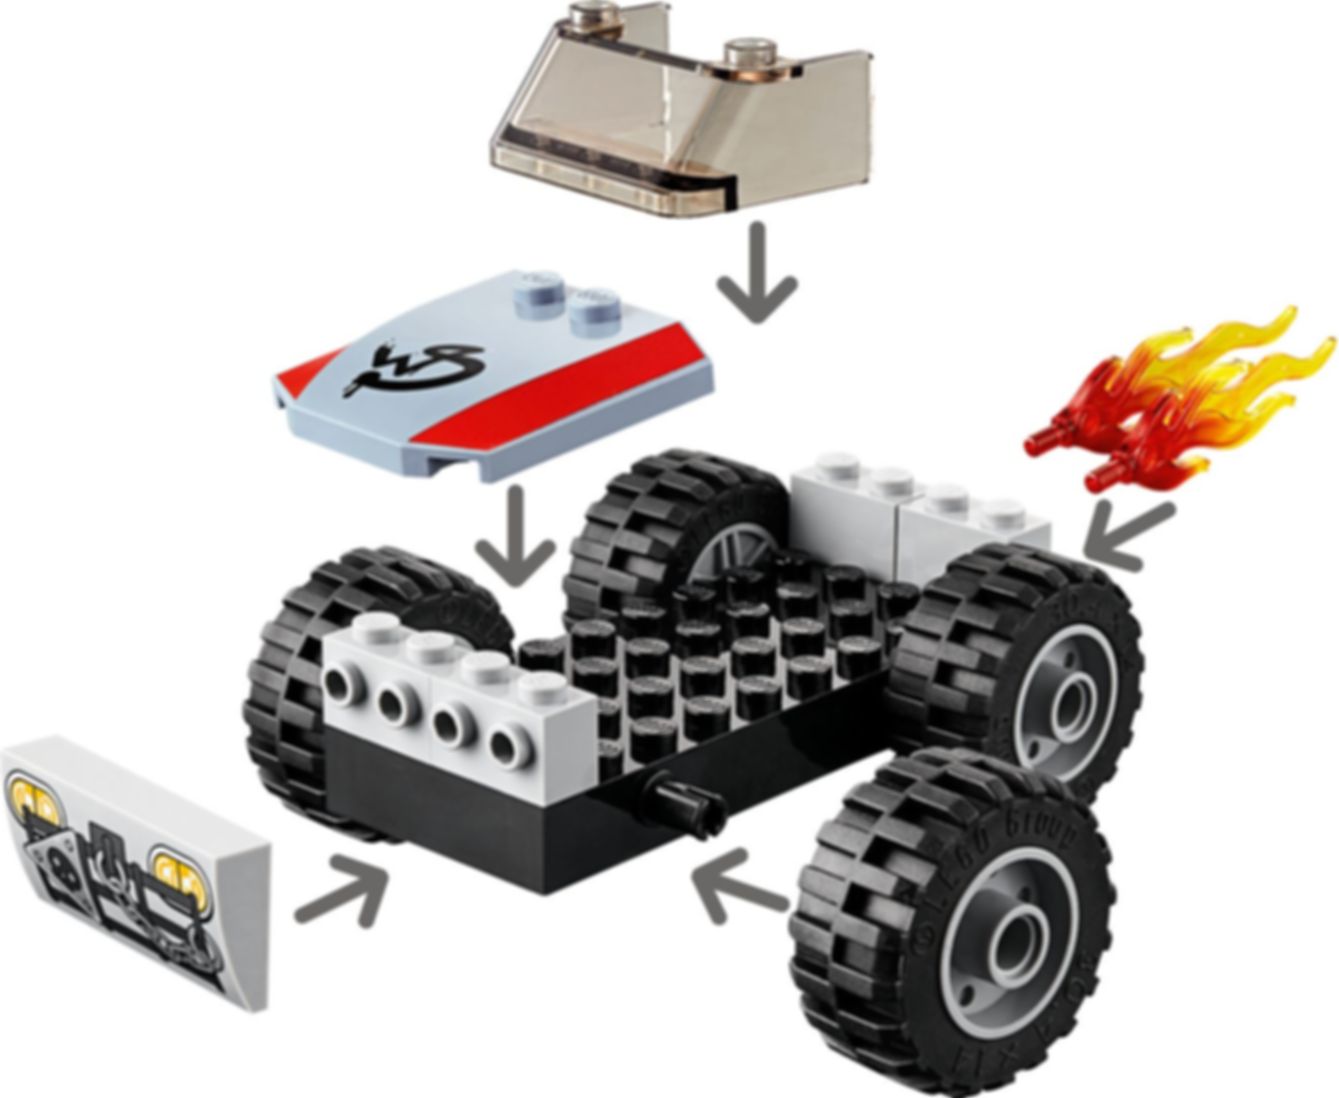 LEGO® Movie Emmet and Benny's ‘Build and Fix' Workshop! components